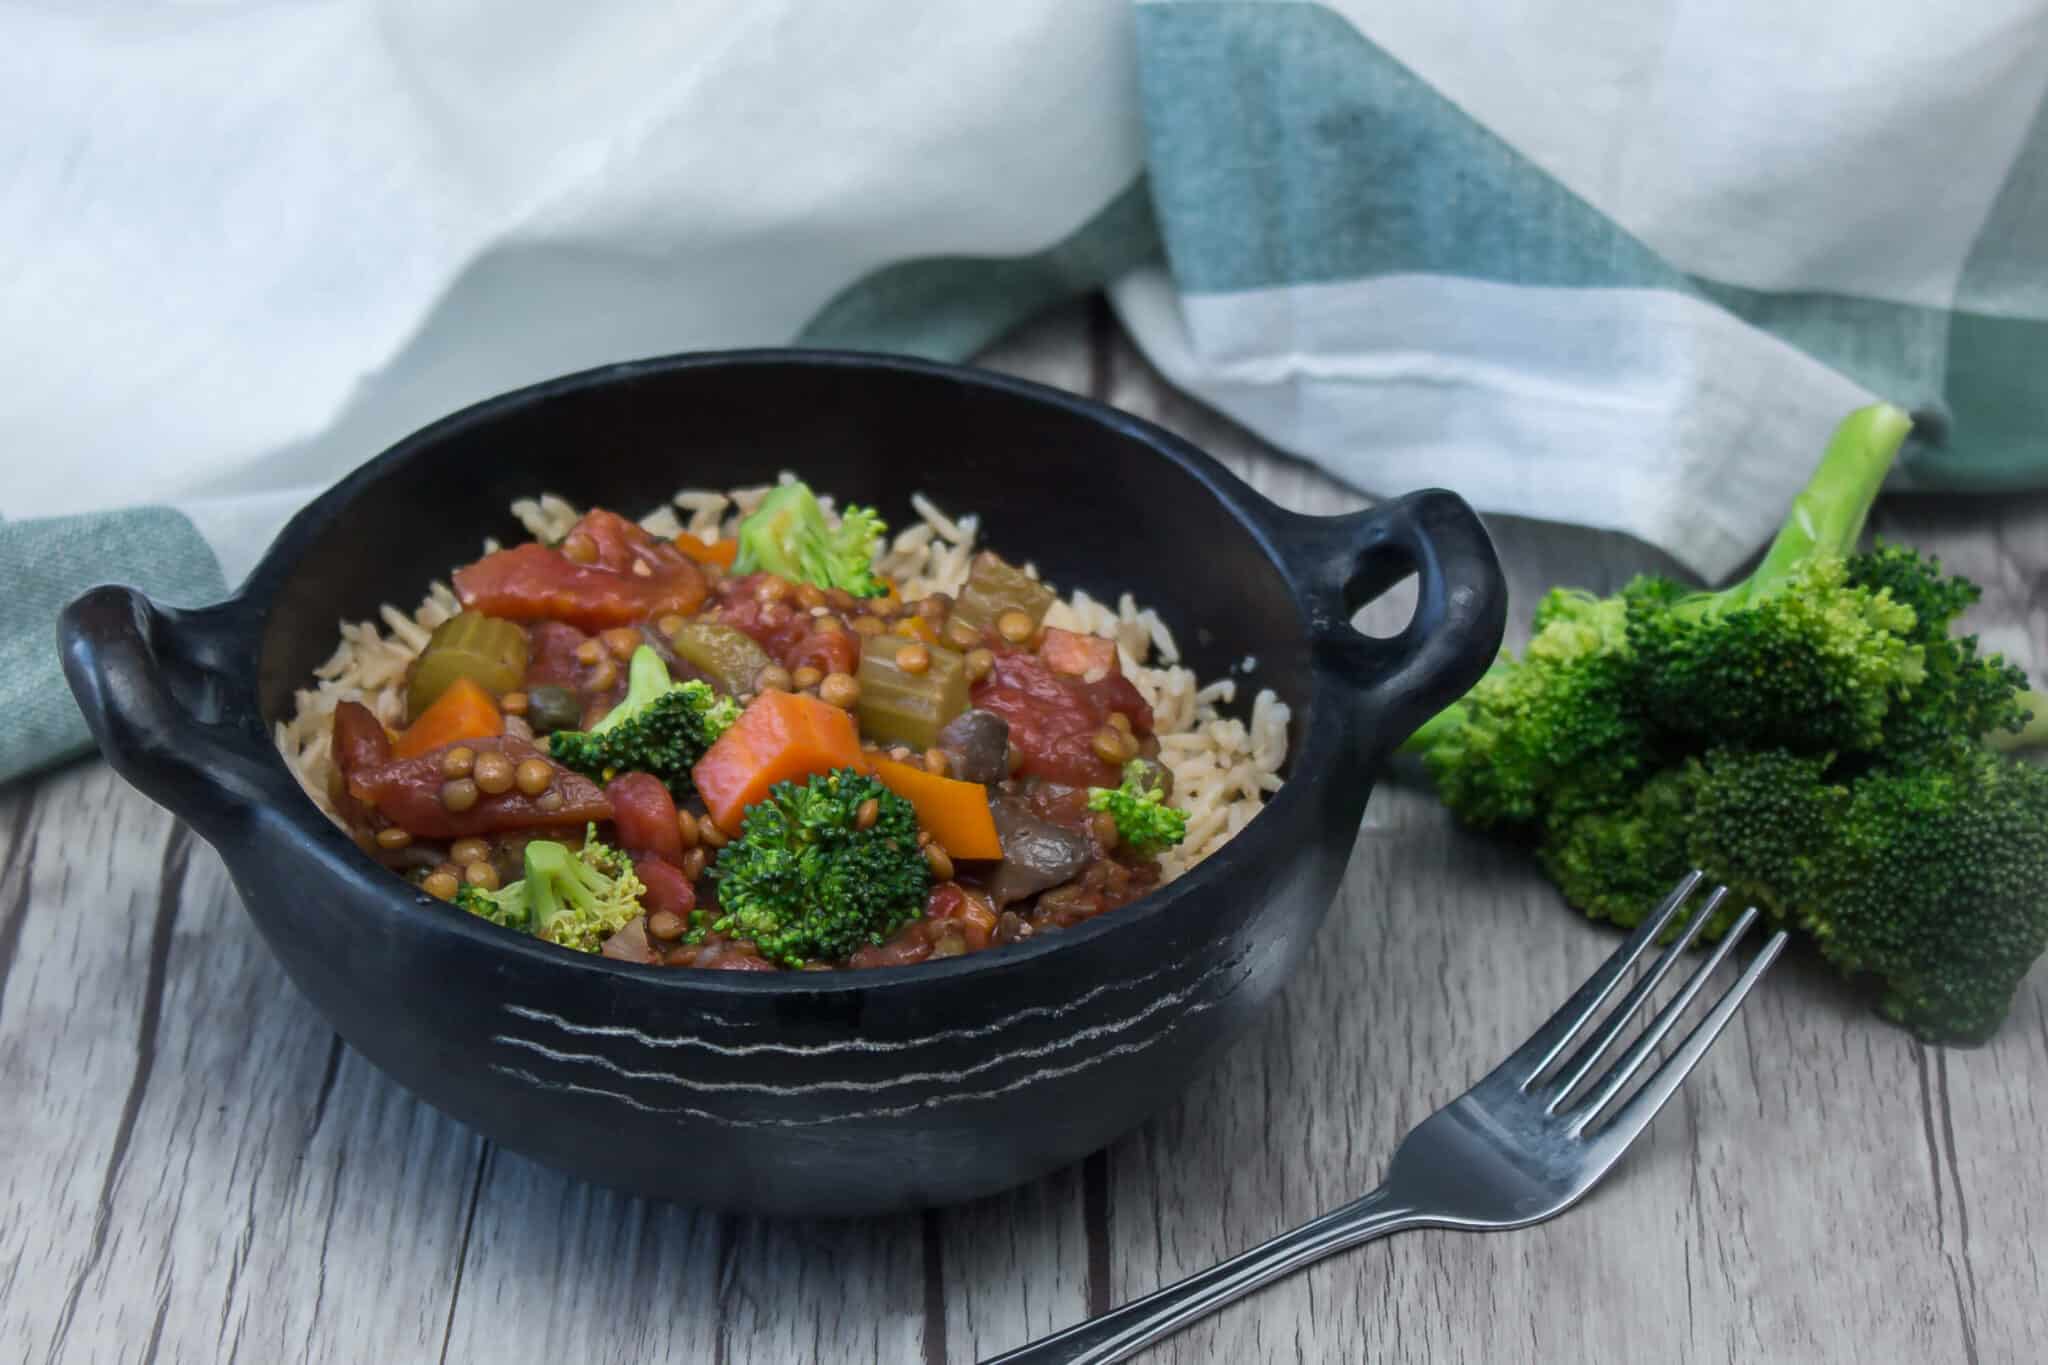 Protein-Packed Plant-Based Lentil Stew